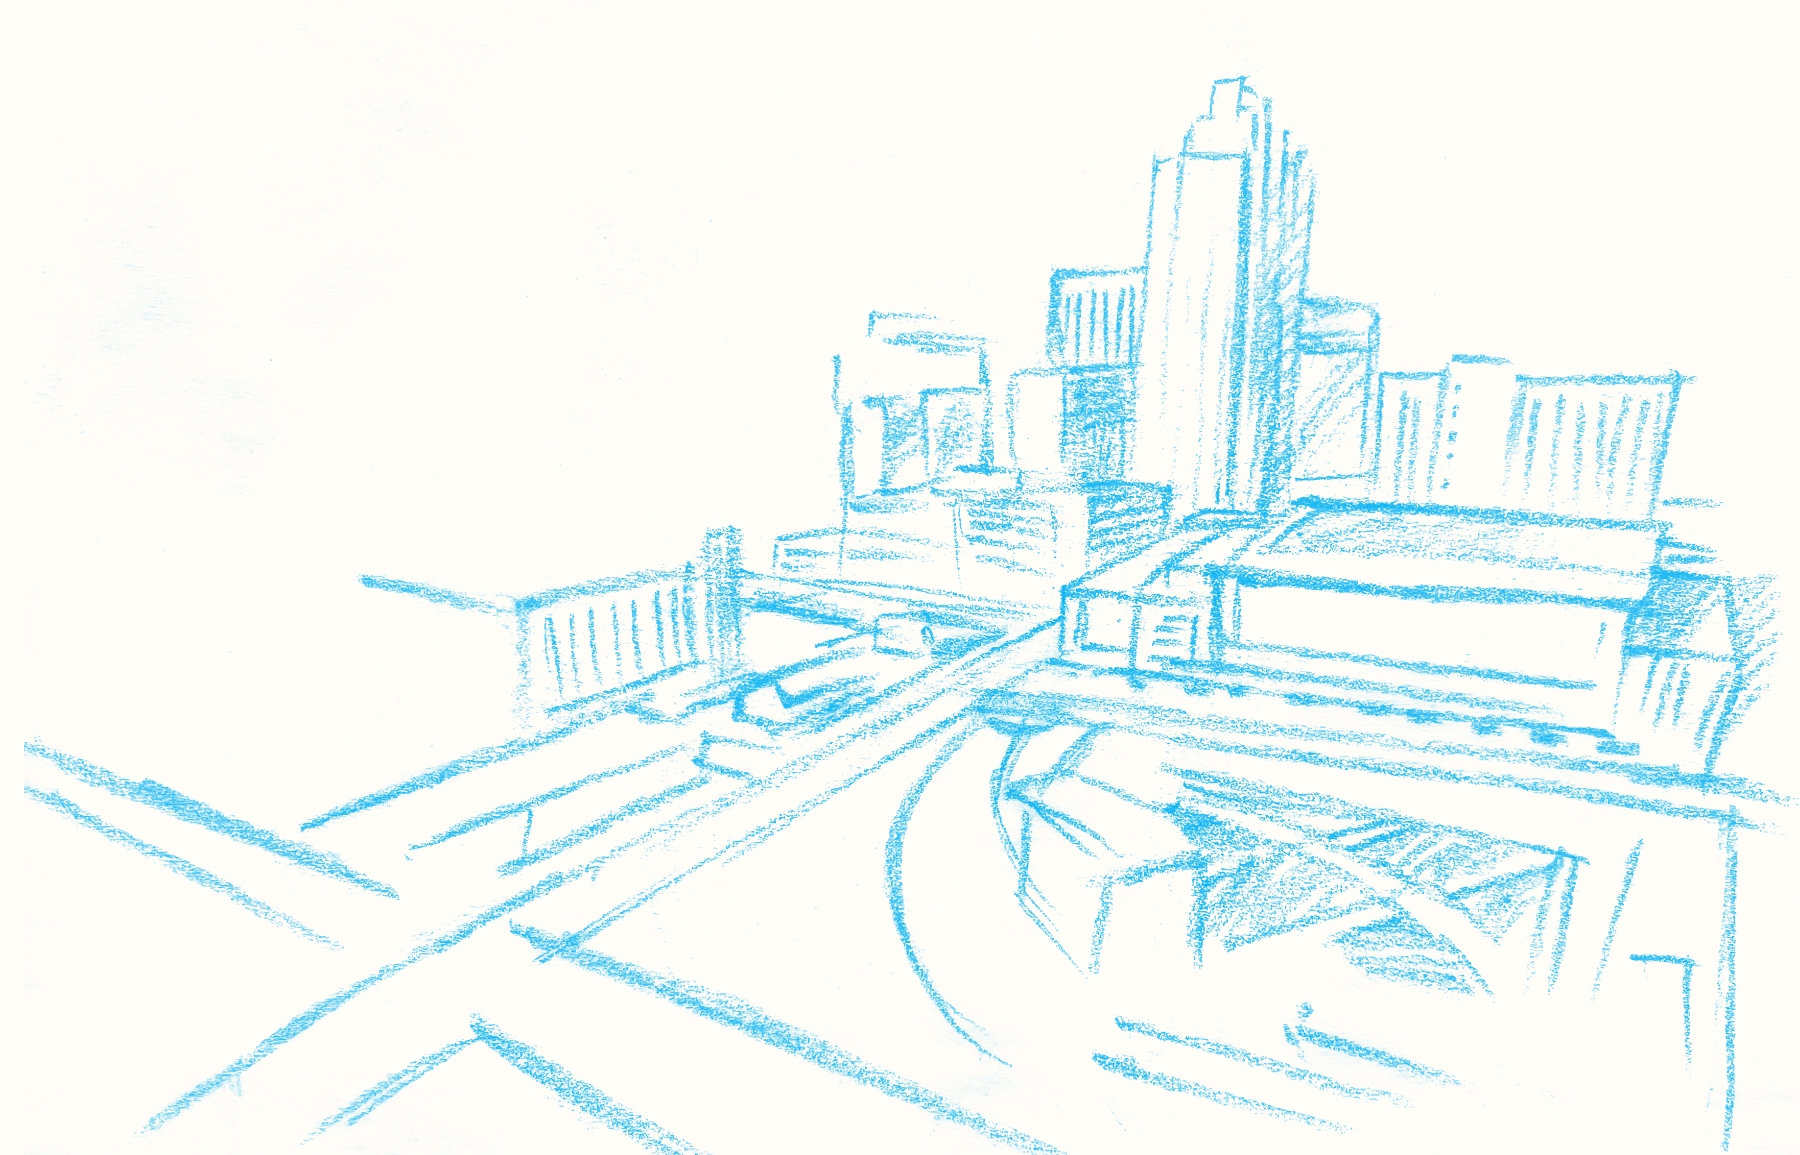 Morrisville, North Carolina. Sky view illustration of Down Town Raleigh